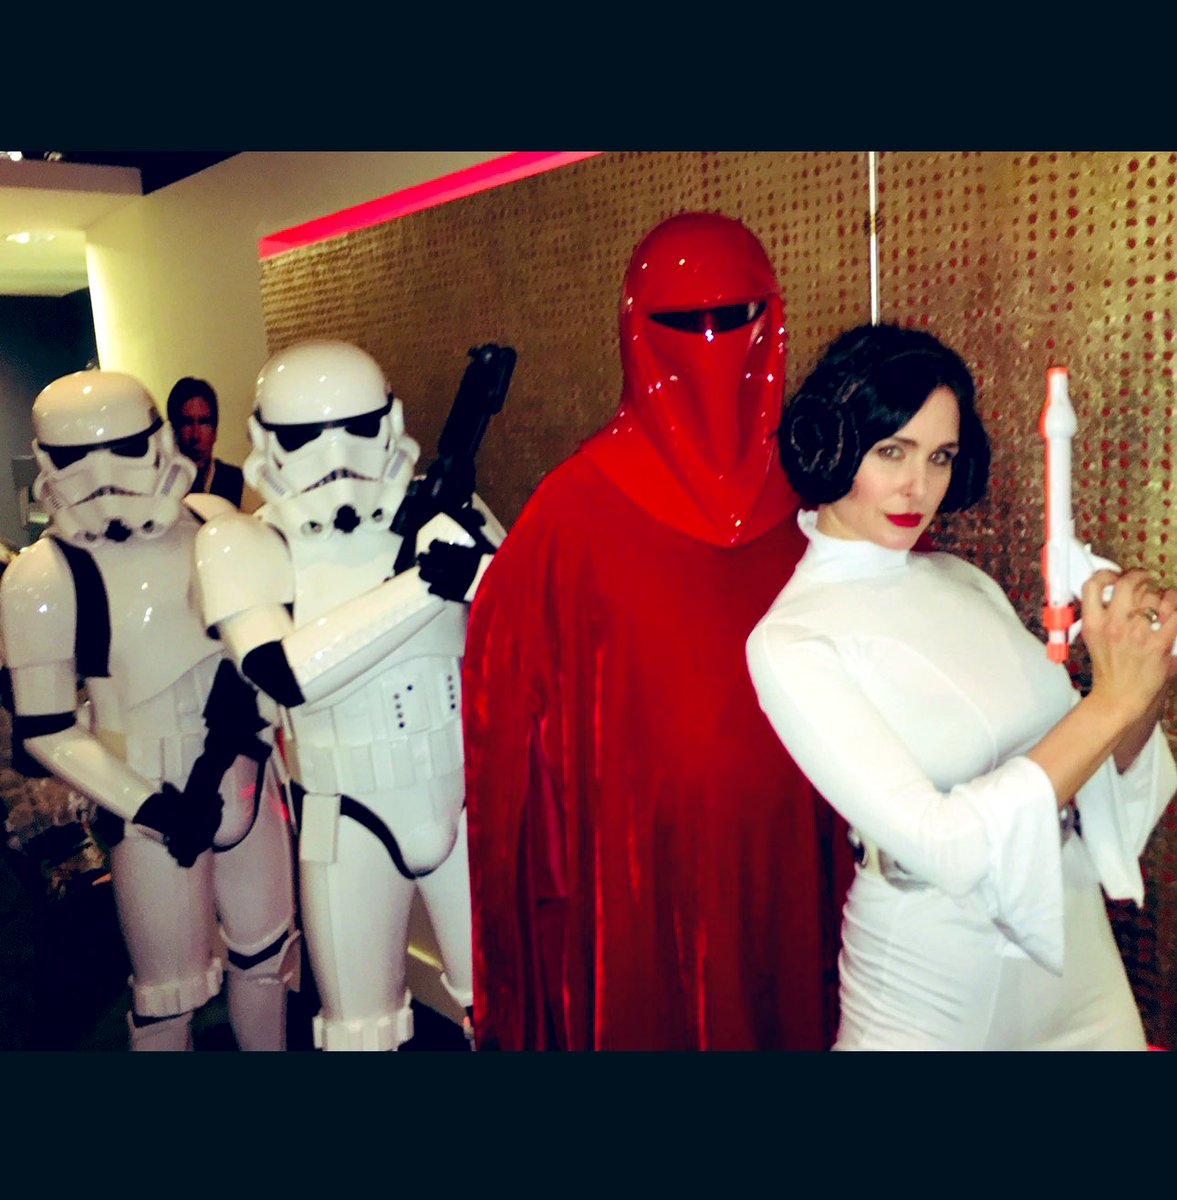 In the days of my Rebellion I was looking for someone to Guard my Royal back. These guys were real Troopers. #May4thBeWithYou 💋♥️ #StarWarsDay